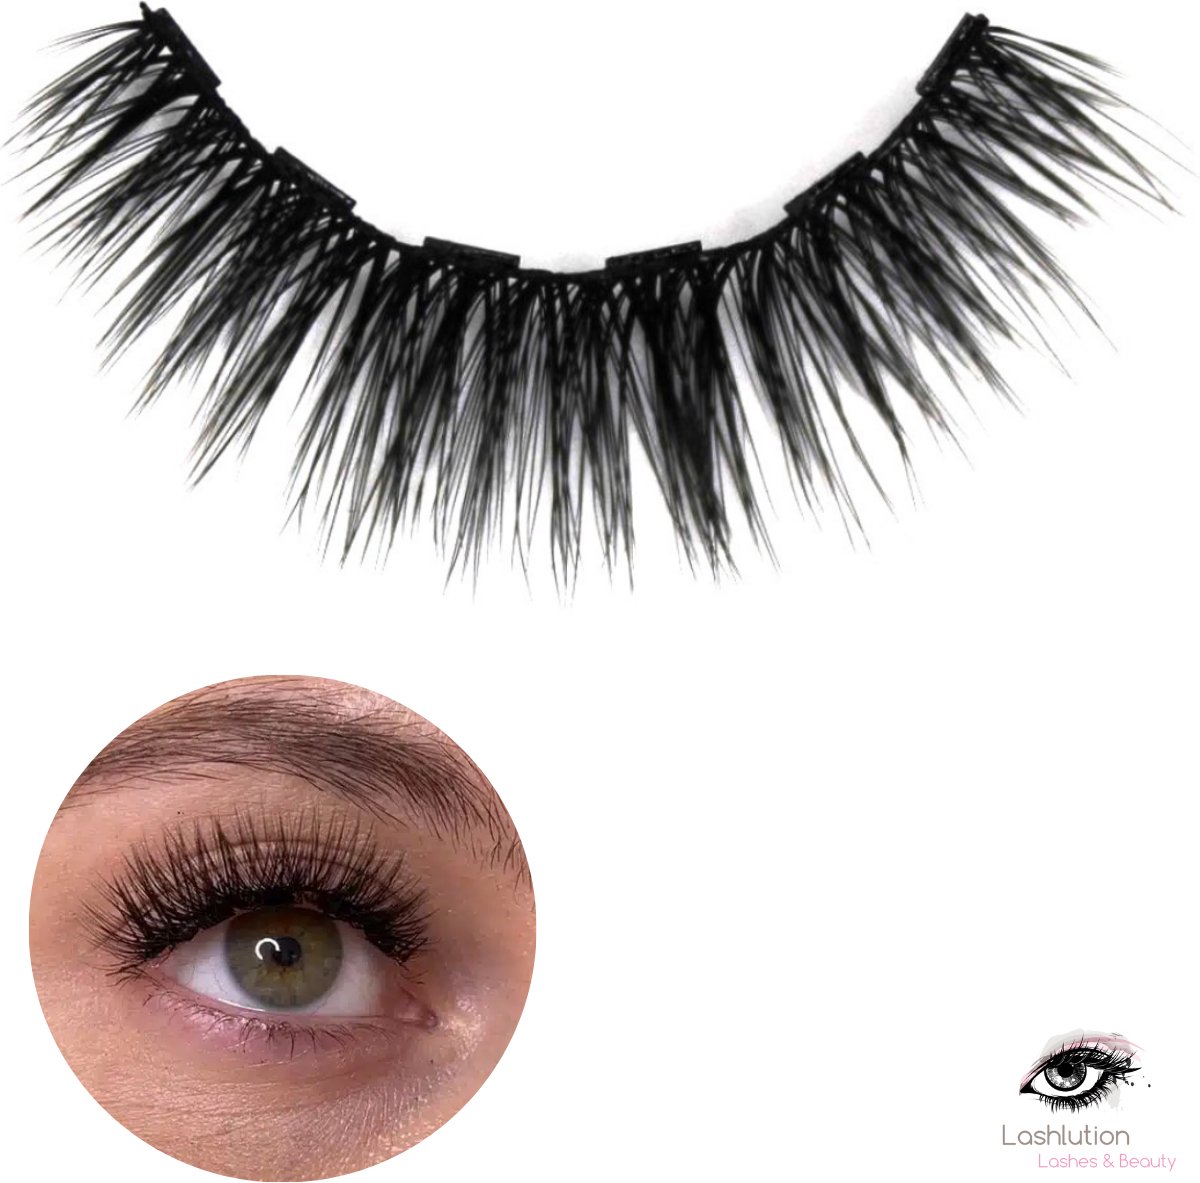 Lashlution Magnetische Wimpers - Kimberly Dramatic Collectie - Losse Lashes